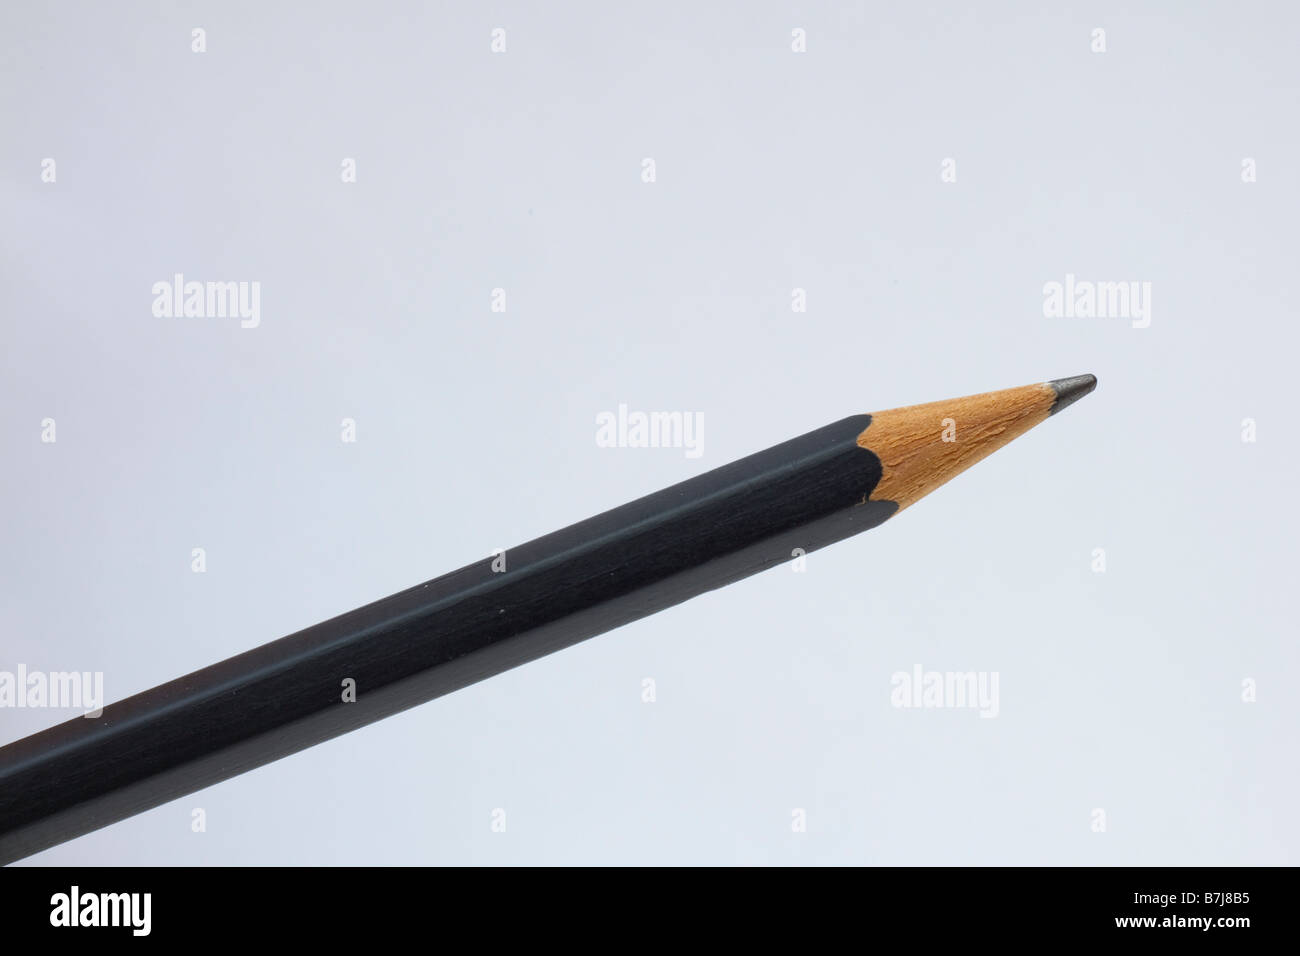 Black Pencil and Tip Stock Photo